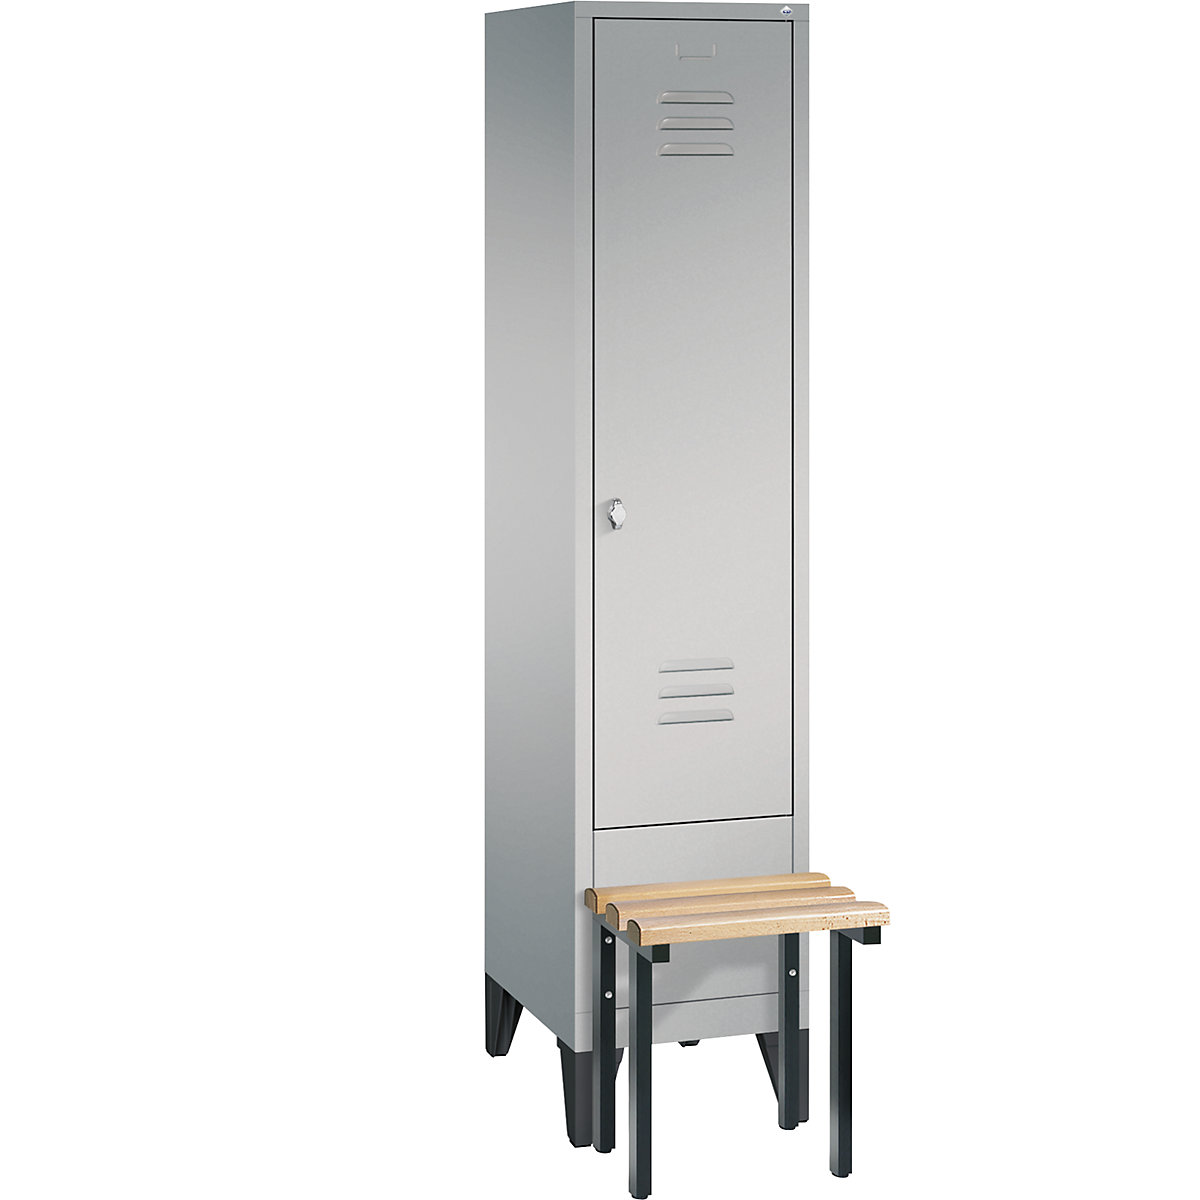 CLASSIC cloakroom locker with bench mounted in front – C+P, 1 compartment, compartment width 400 mm, white aluminium-4